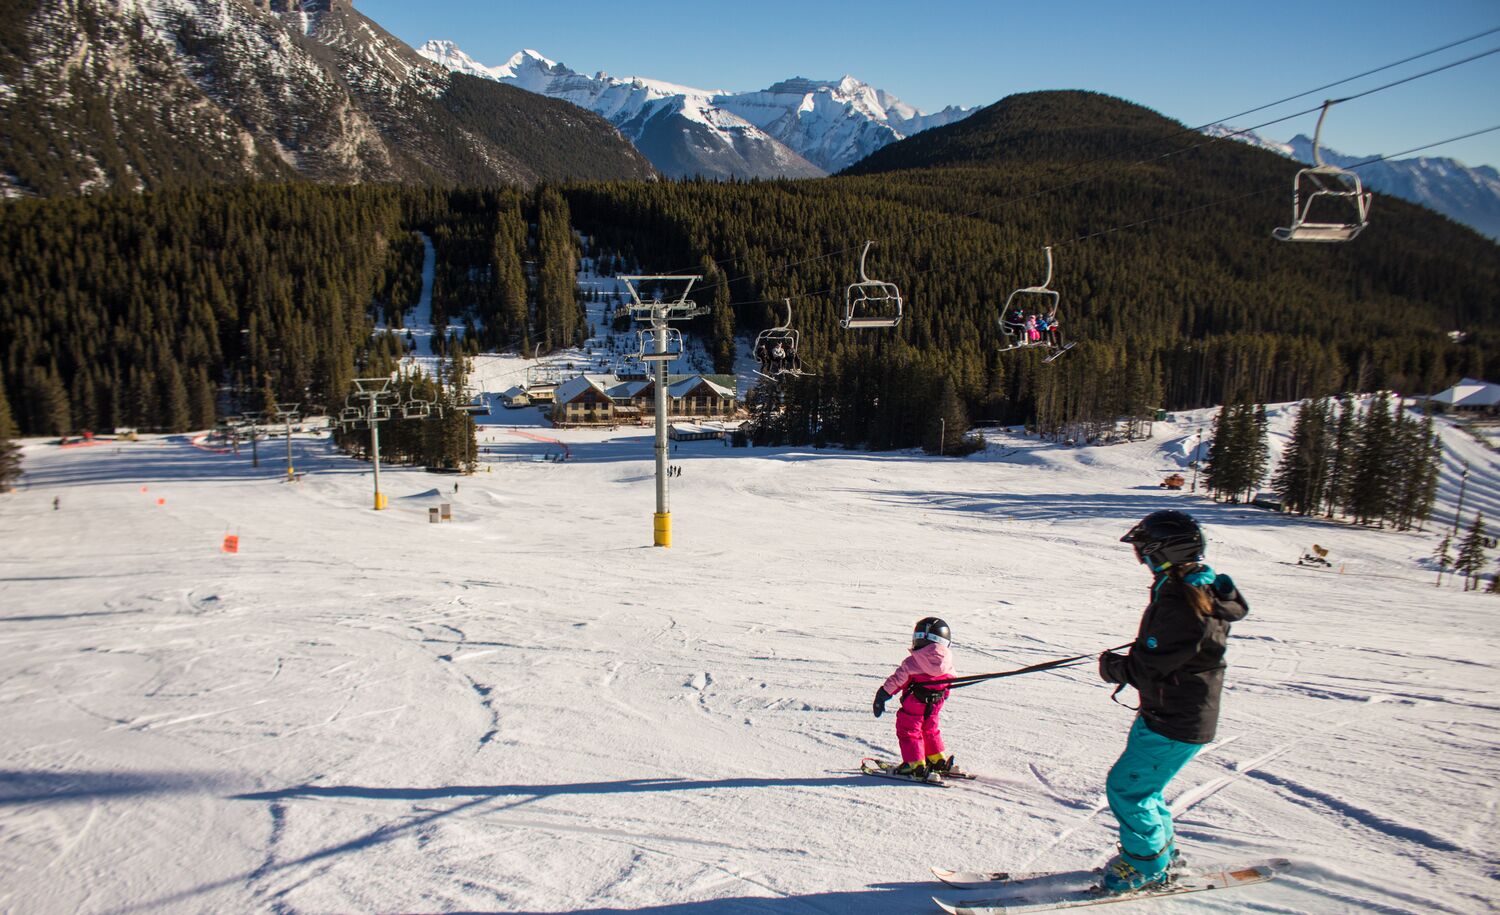 A parent and their kid go down the Cascade run at Mt. Norquay Ski Resort in Banff National Park.